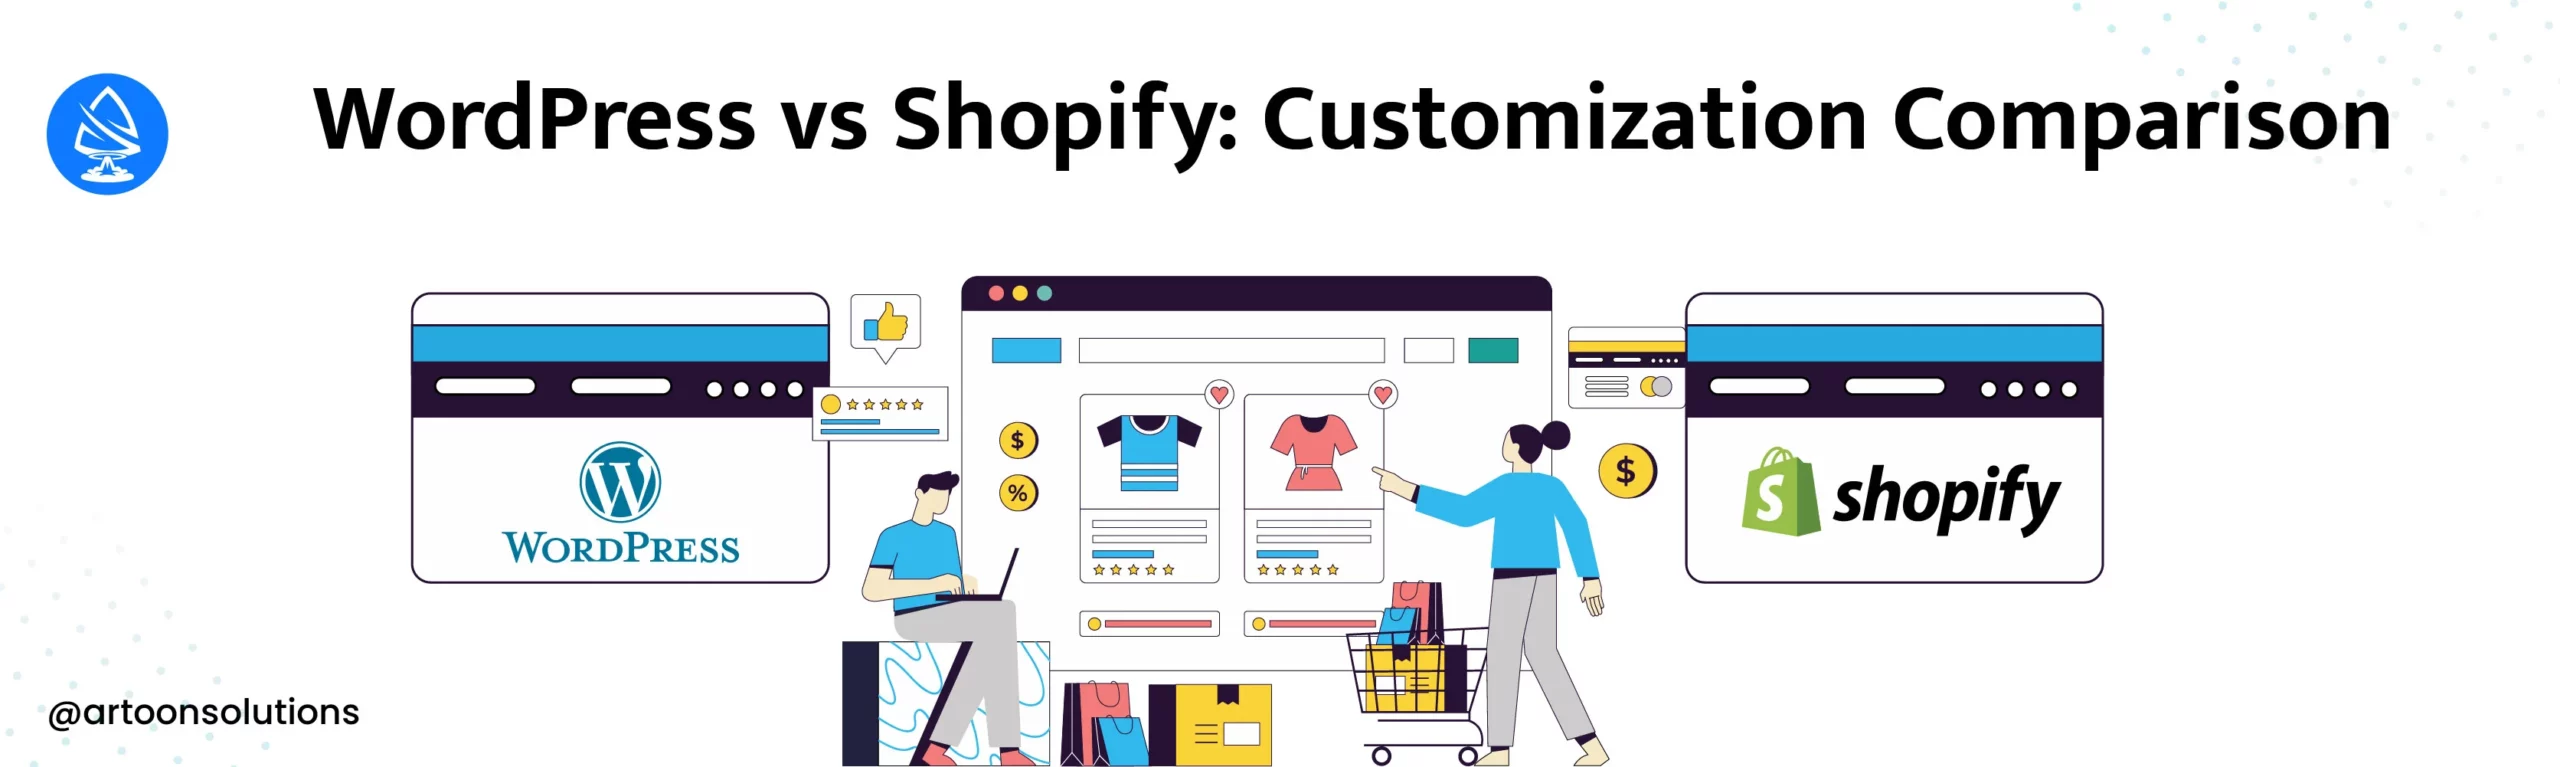 WordPress's Extensive Themes and Plugins vs Shopify's Theme Editor